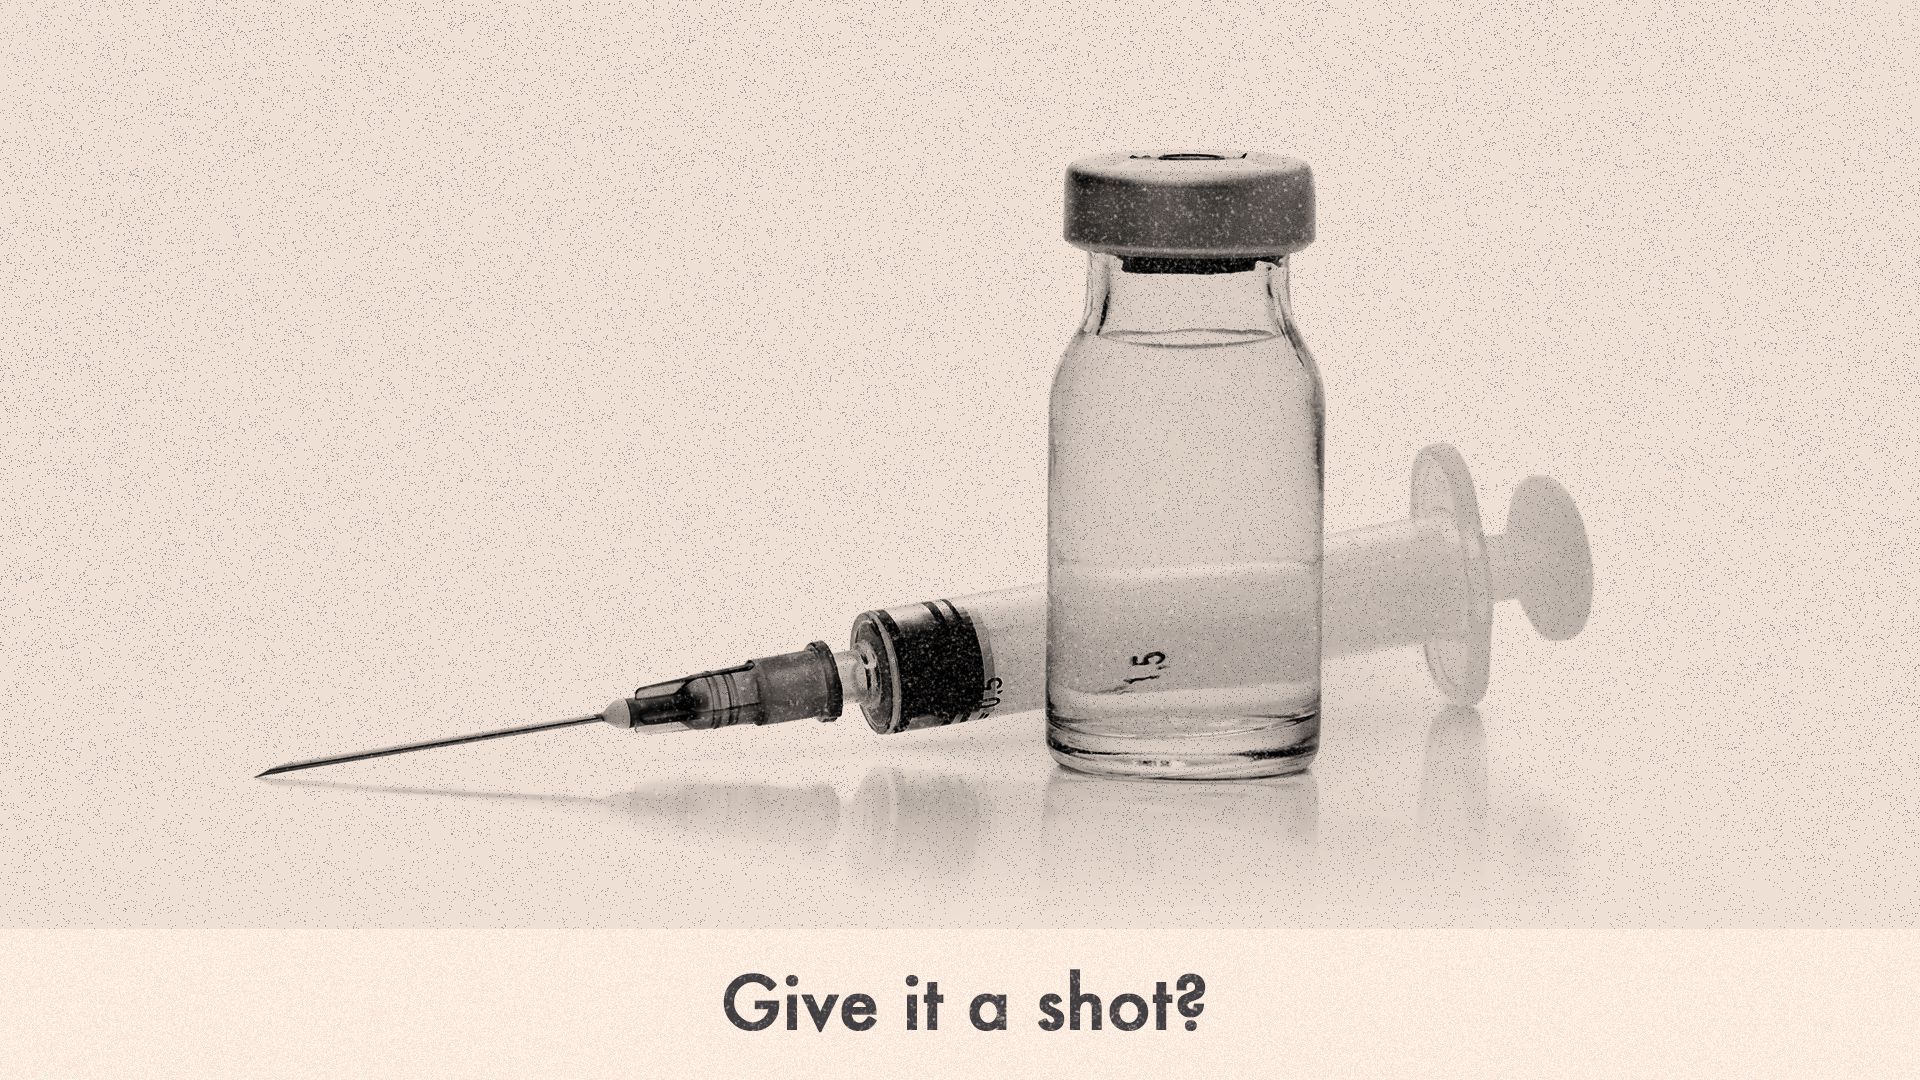 Illustration of a syringe and vial with text underneath that reads, "Give it a shot?" stylized in the 1950s-60s VW advertisement style.   